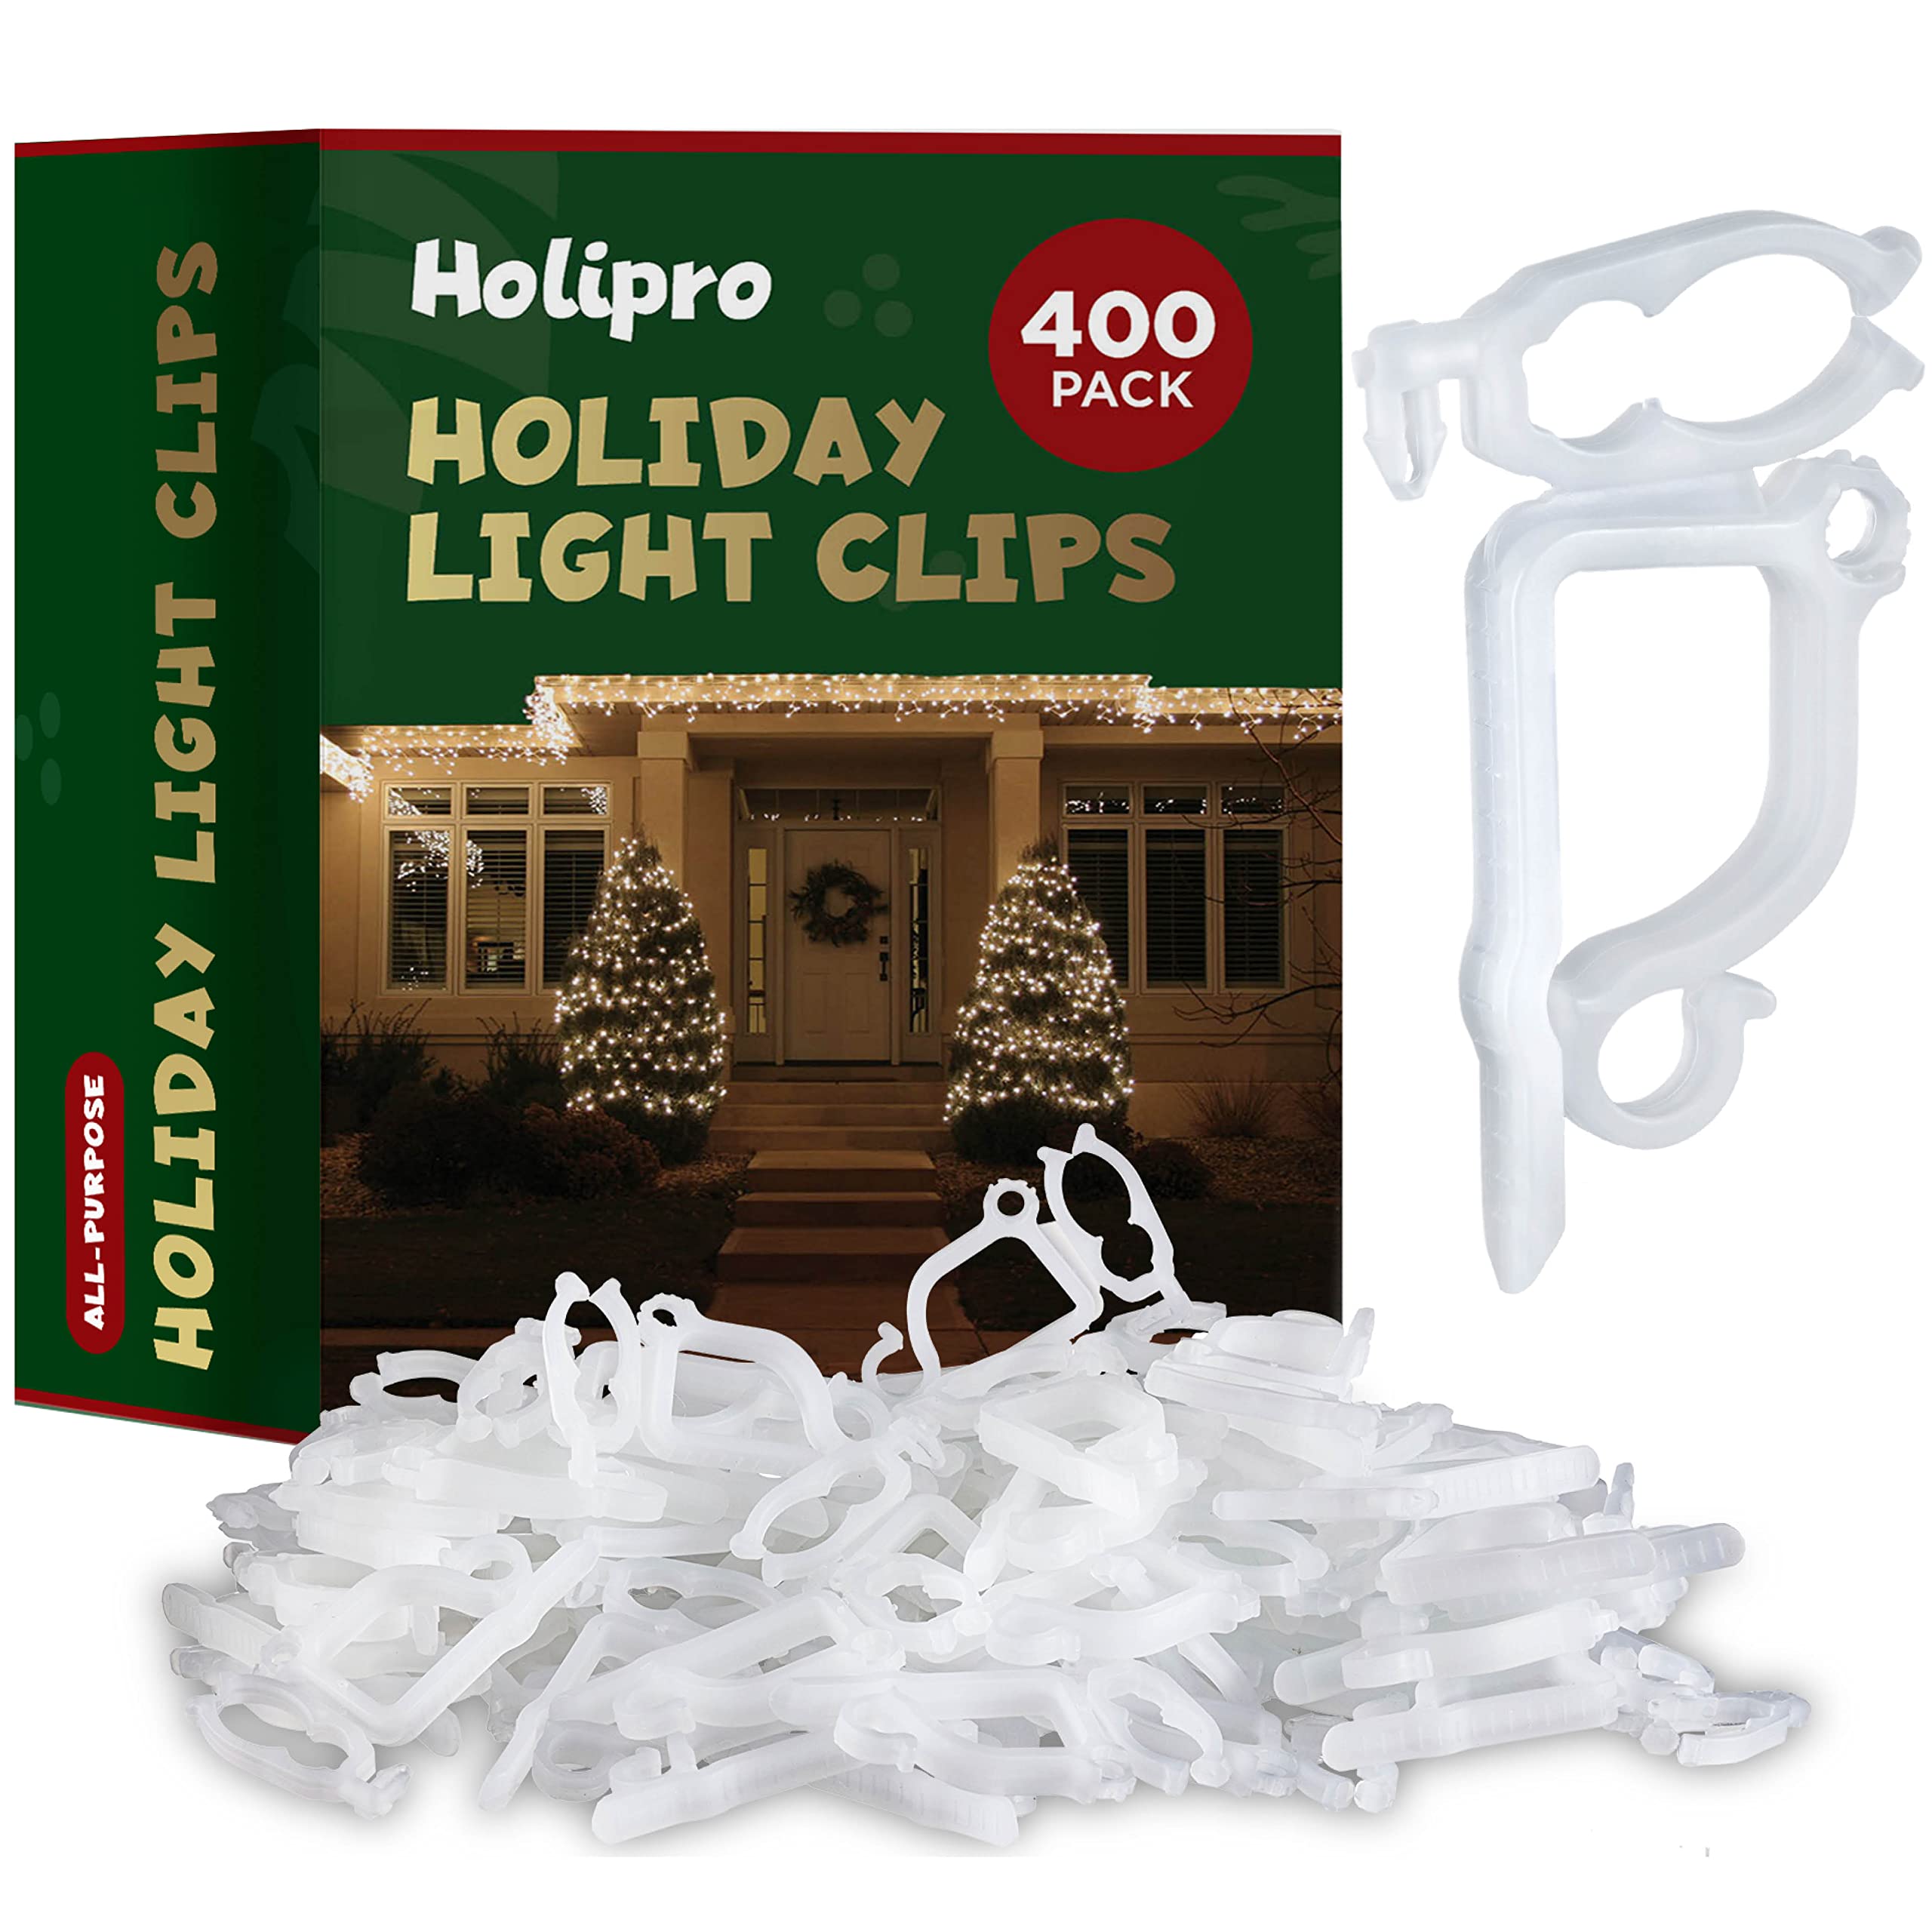 All-Purpose Holiday Light Clips [Set of 400] Christmas Light Clips, Outdoor Light Clips - Mount to Shingles & Gutters - Works with Mini, C6, C7, C9, Rope, Icicle Lights - No Tools Required - USA Made